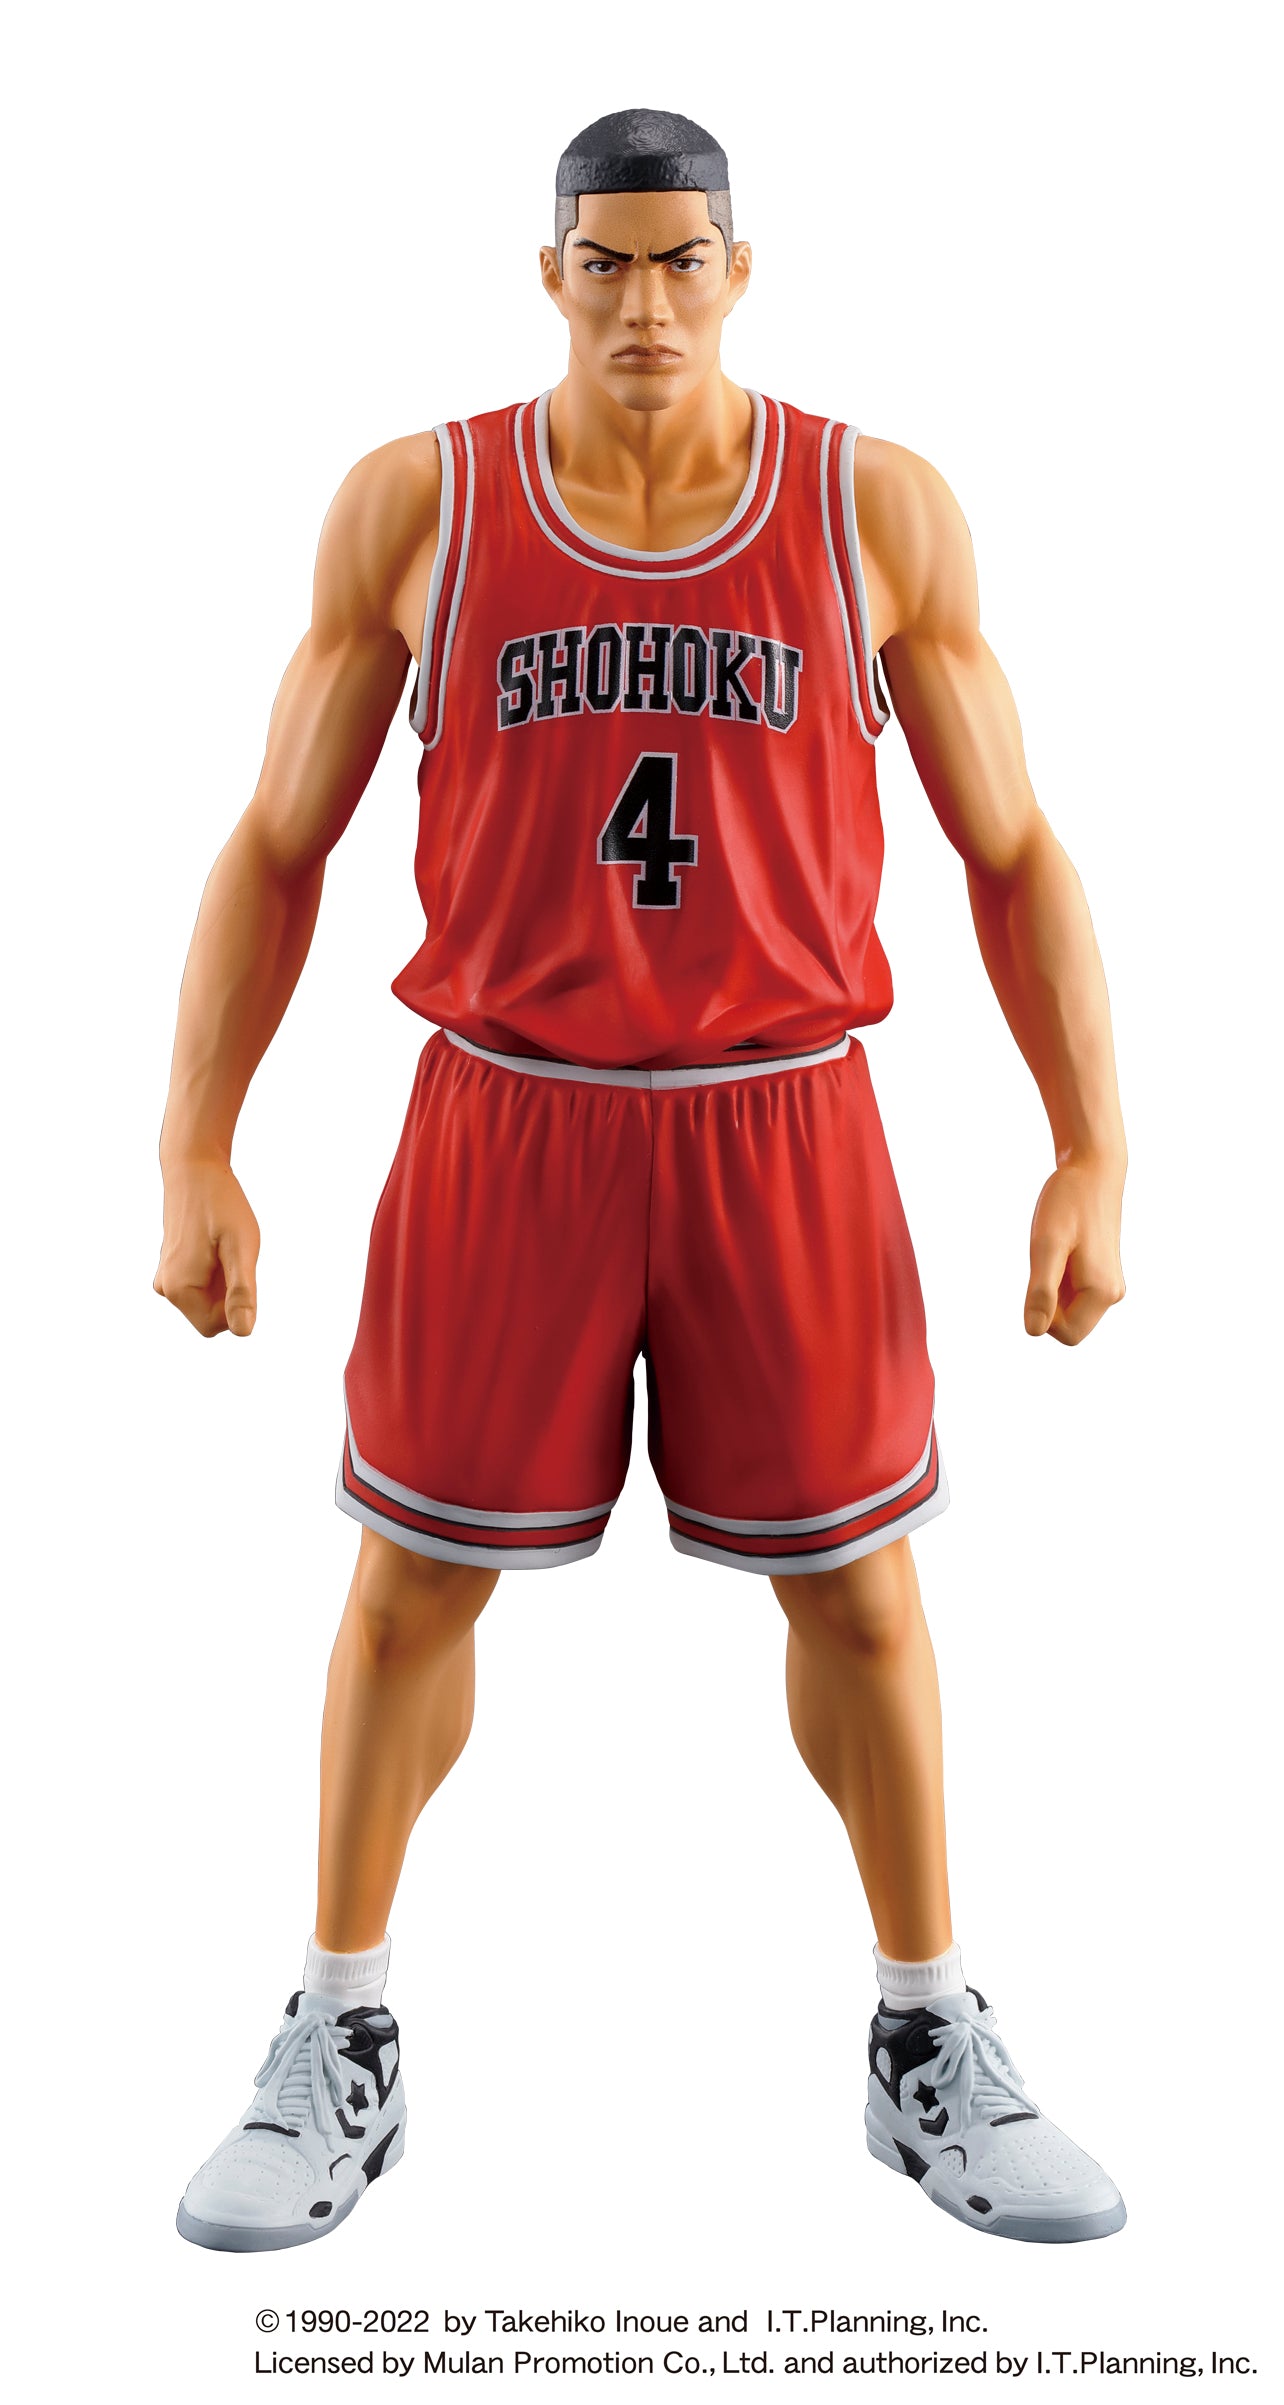 The spirit collection of Inoue Takehiko [ SLAM DUNK ] One and Only 湘北  STARTING MEMBER SET 5 figures (Red box 特別限定 ver.) 人物模型 (手办 / 公仔) ※附 官方传单